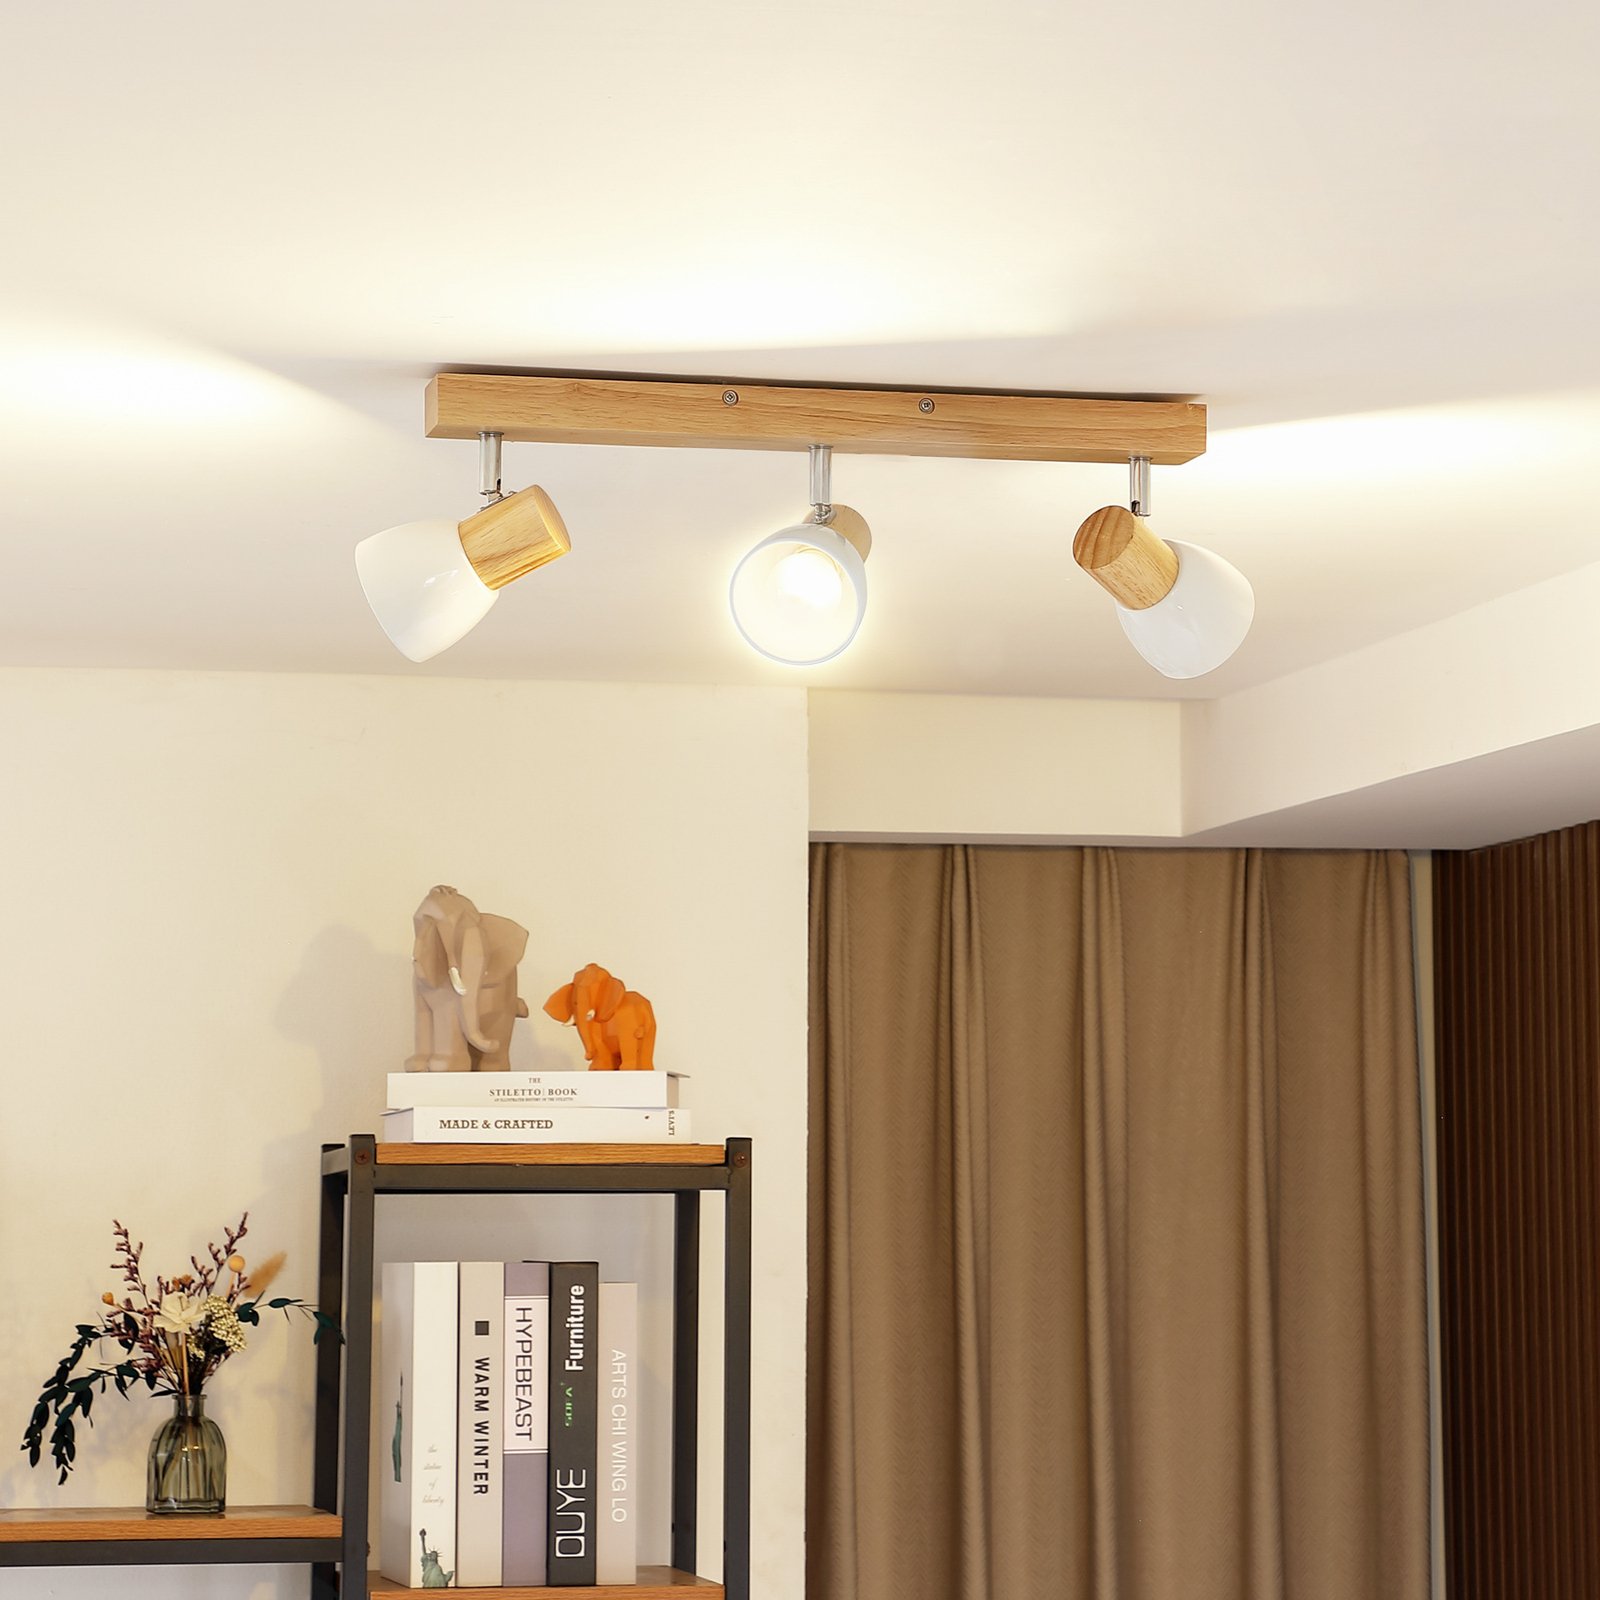 3-bulb ceiling light Thorin with wood